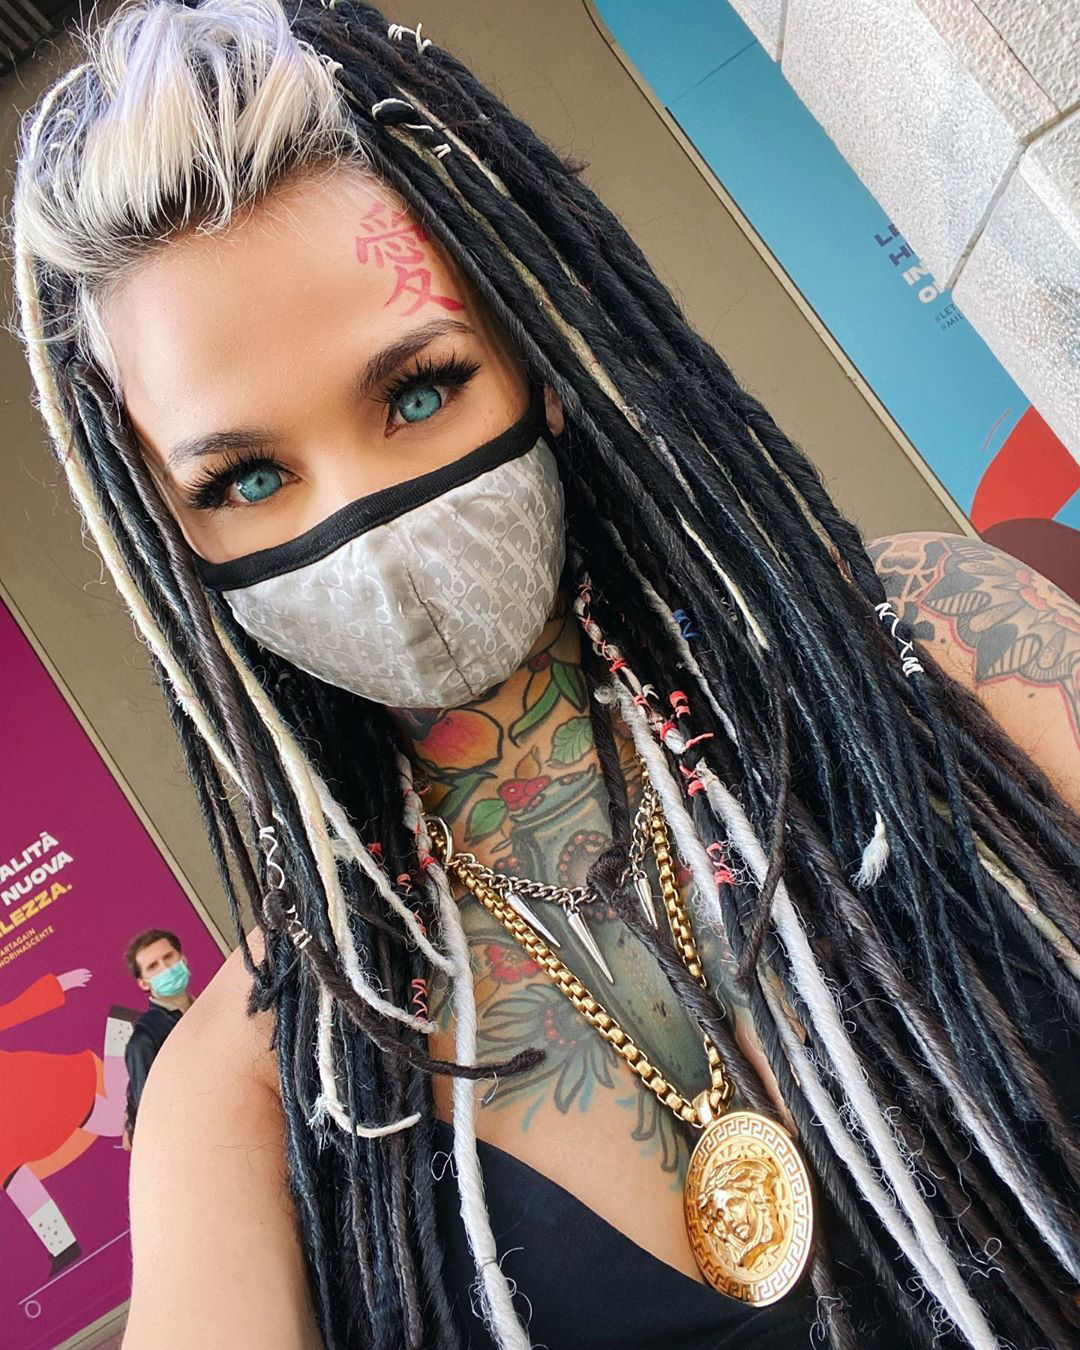 Photo by Devynsdogg with the username @Devynsdogg,  May 18, 2020 at 8:52 PM. The post is about the topic Girls You Dream Of and the text says 'The eyes are the windows of the soul in this new reality! #fetish #sexyfemales #blondesarebeautiful #tattoo #babes #braids #altmodels
https://www.instagram.com/p/CAVnAGJBADz/?utm_source=ig_web_copy_link'